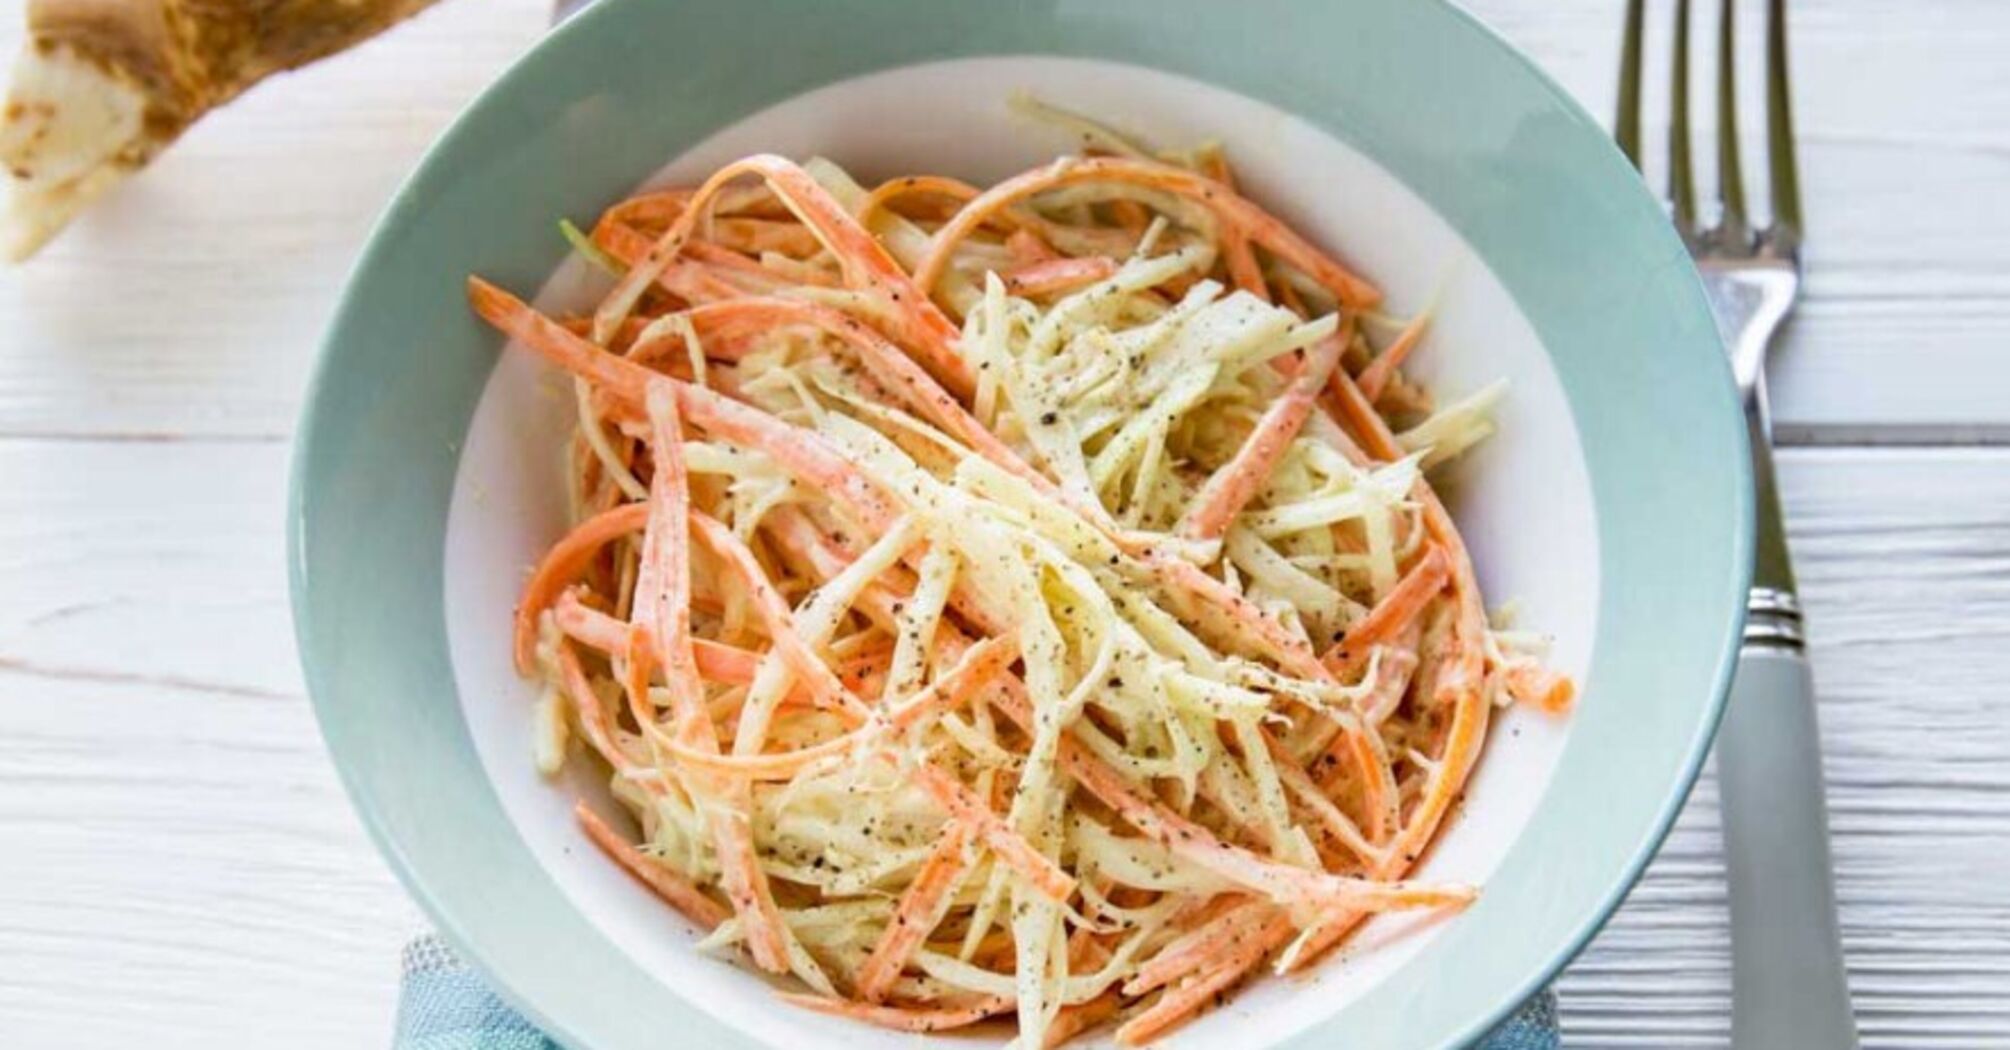 Budget coleslaw salad in 5 minutes: with cabbage and carrots